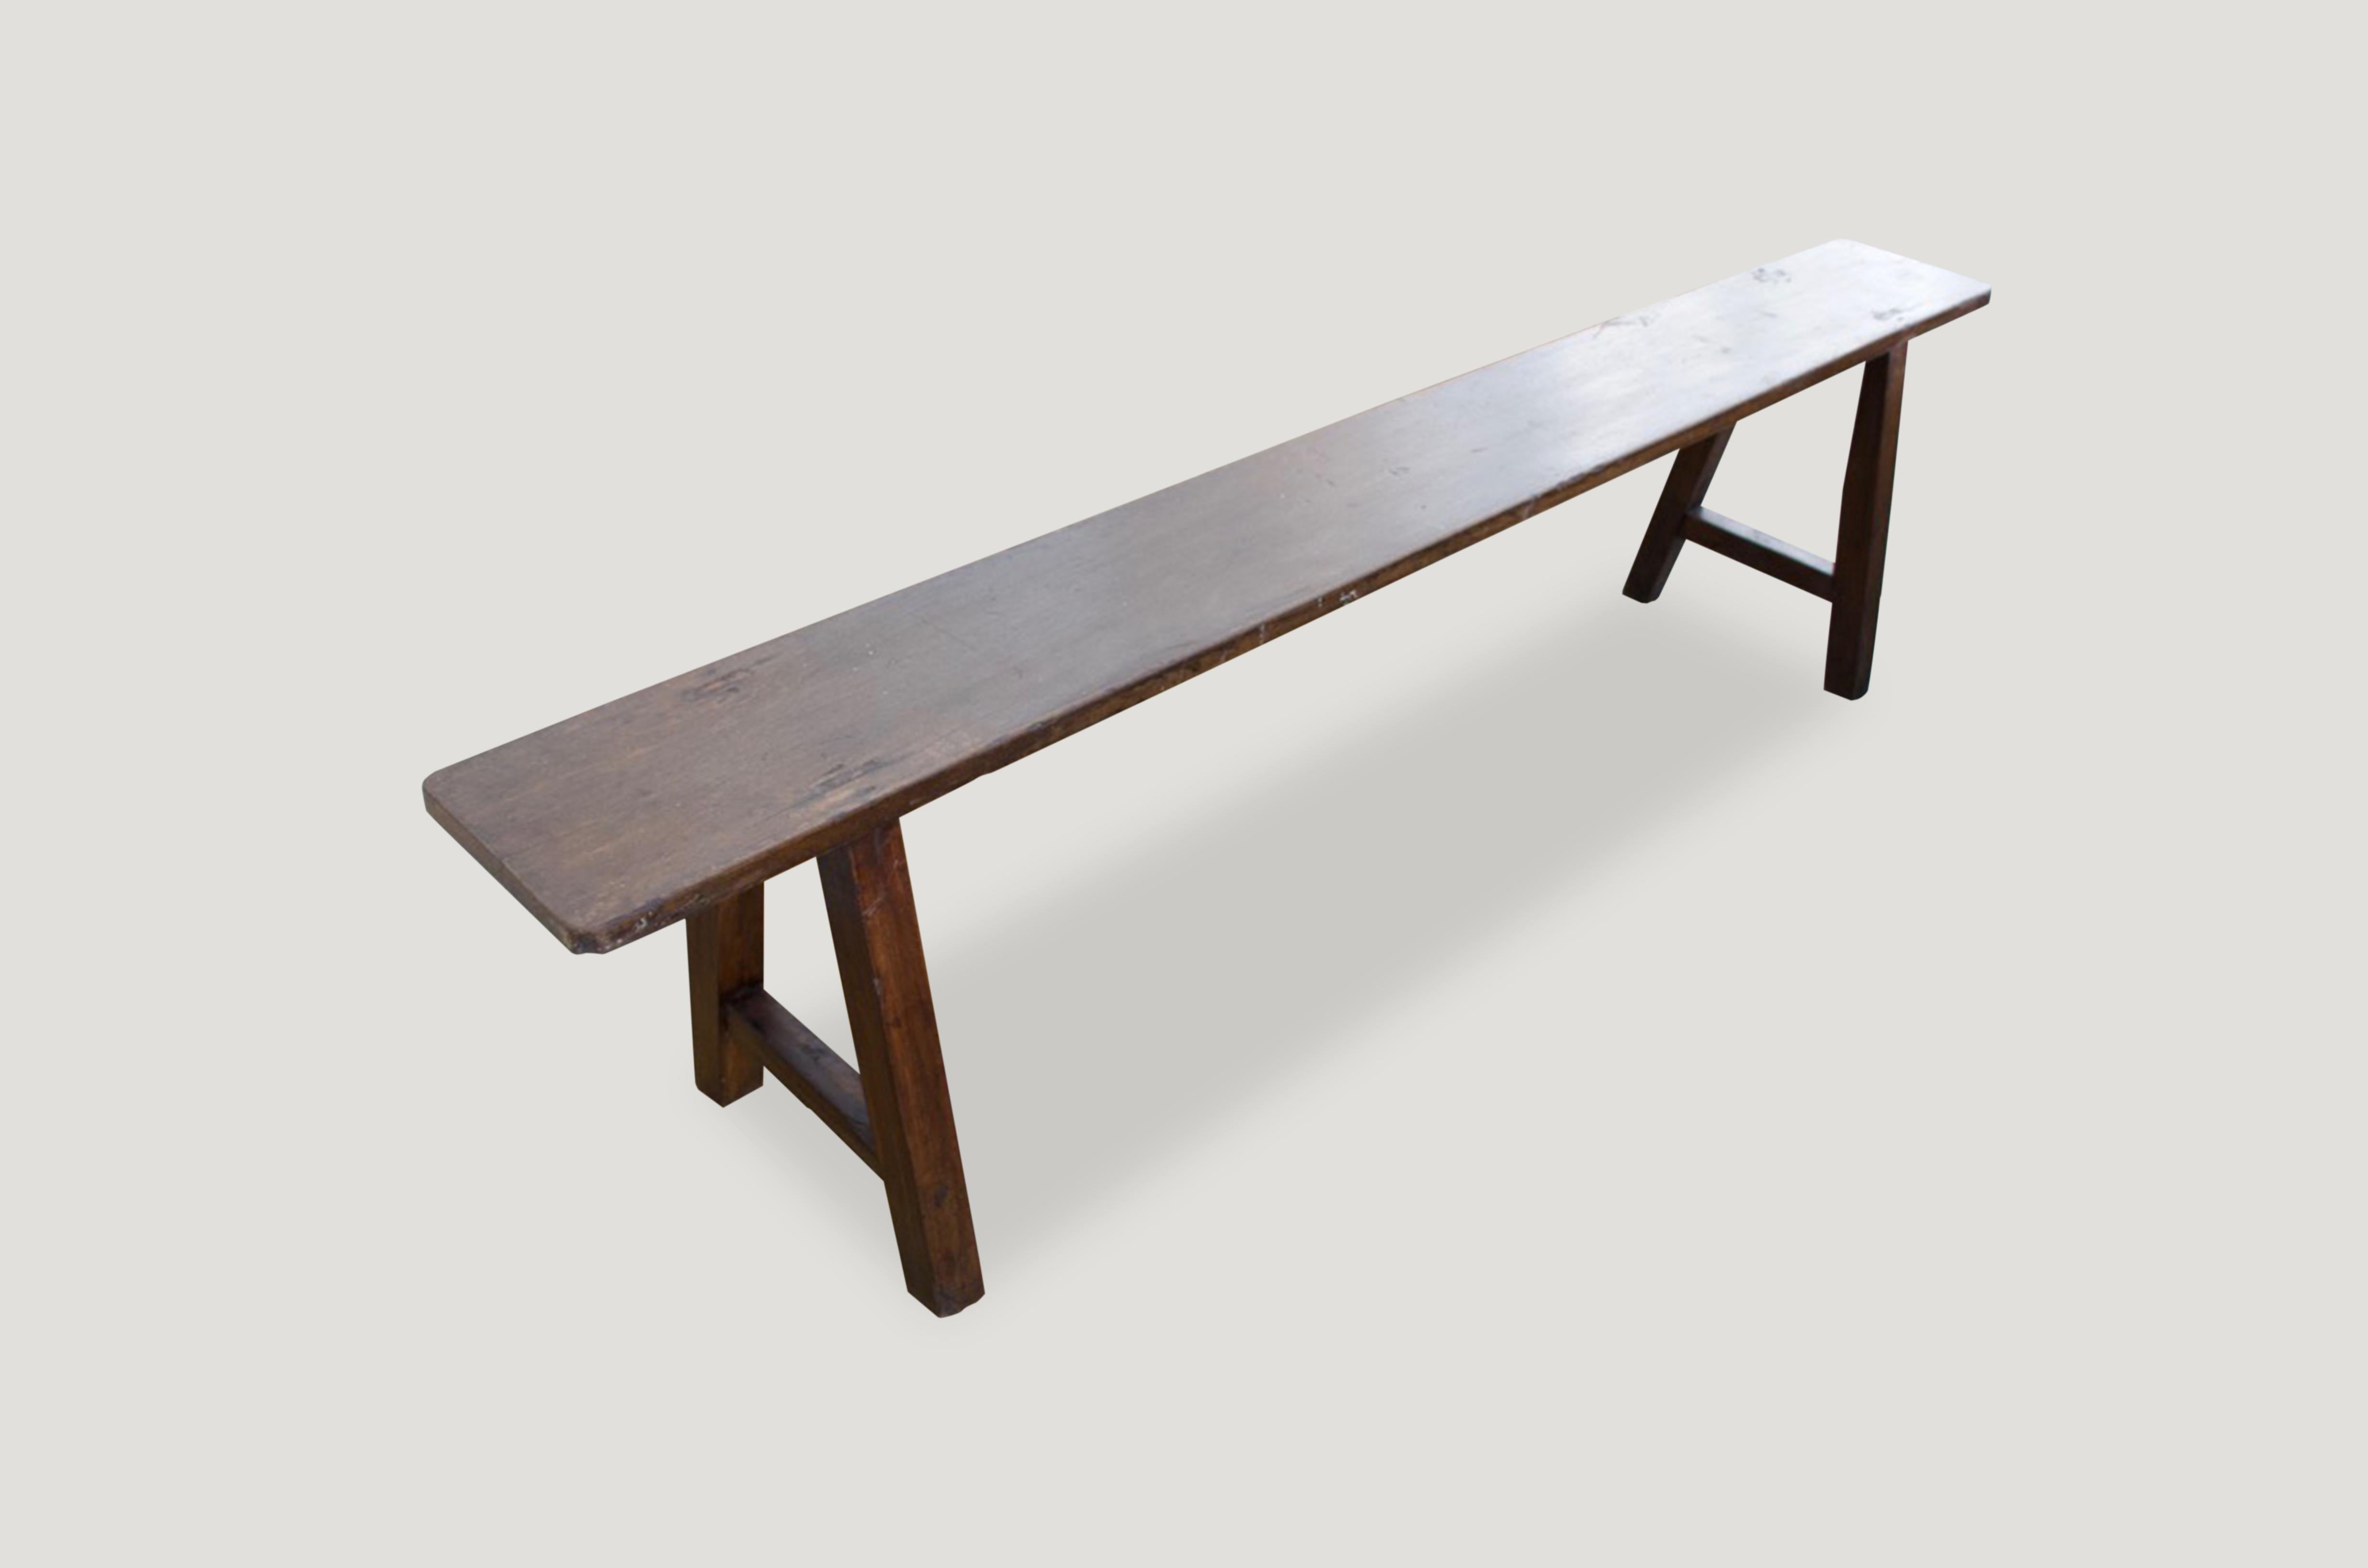 Antique bench or this can also be used as a shelf. Perfect for inside or outside living.

This teak bench was sourced in the spirit of wabi-sabi, a Japanese philosophy that beauty can be found in imperfection and impermanence. It’s a beauty of